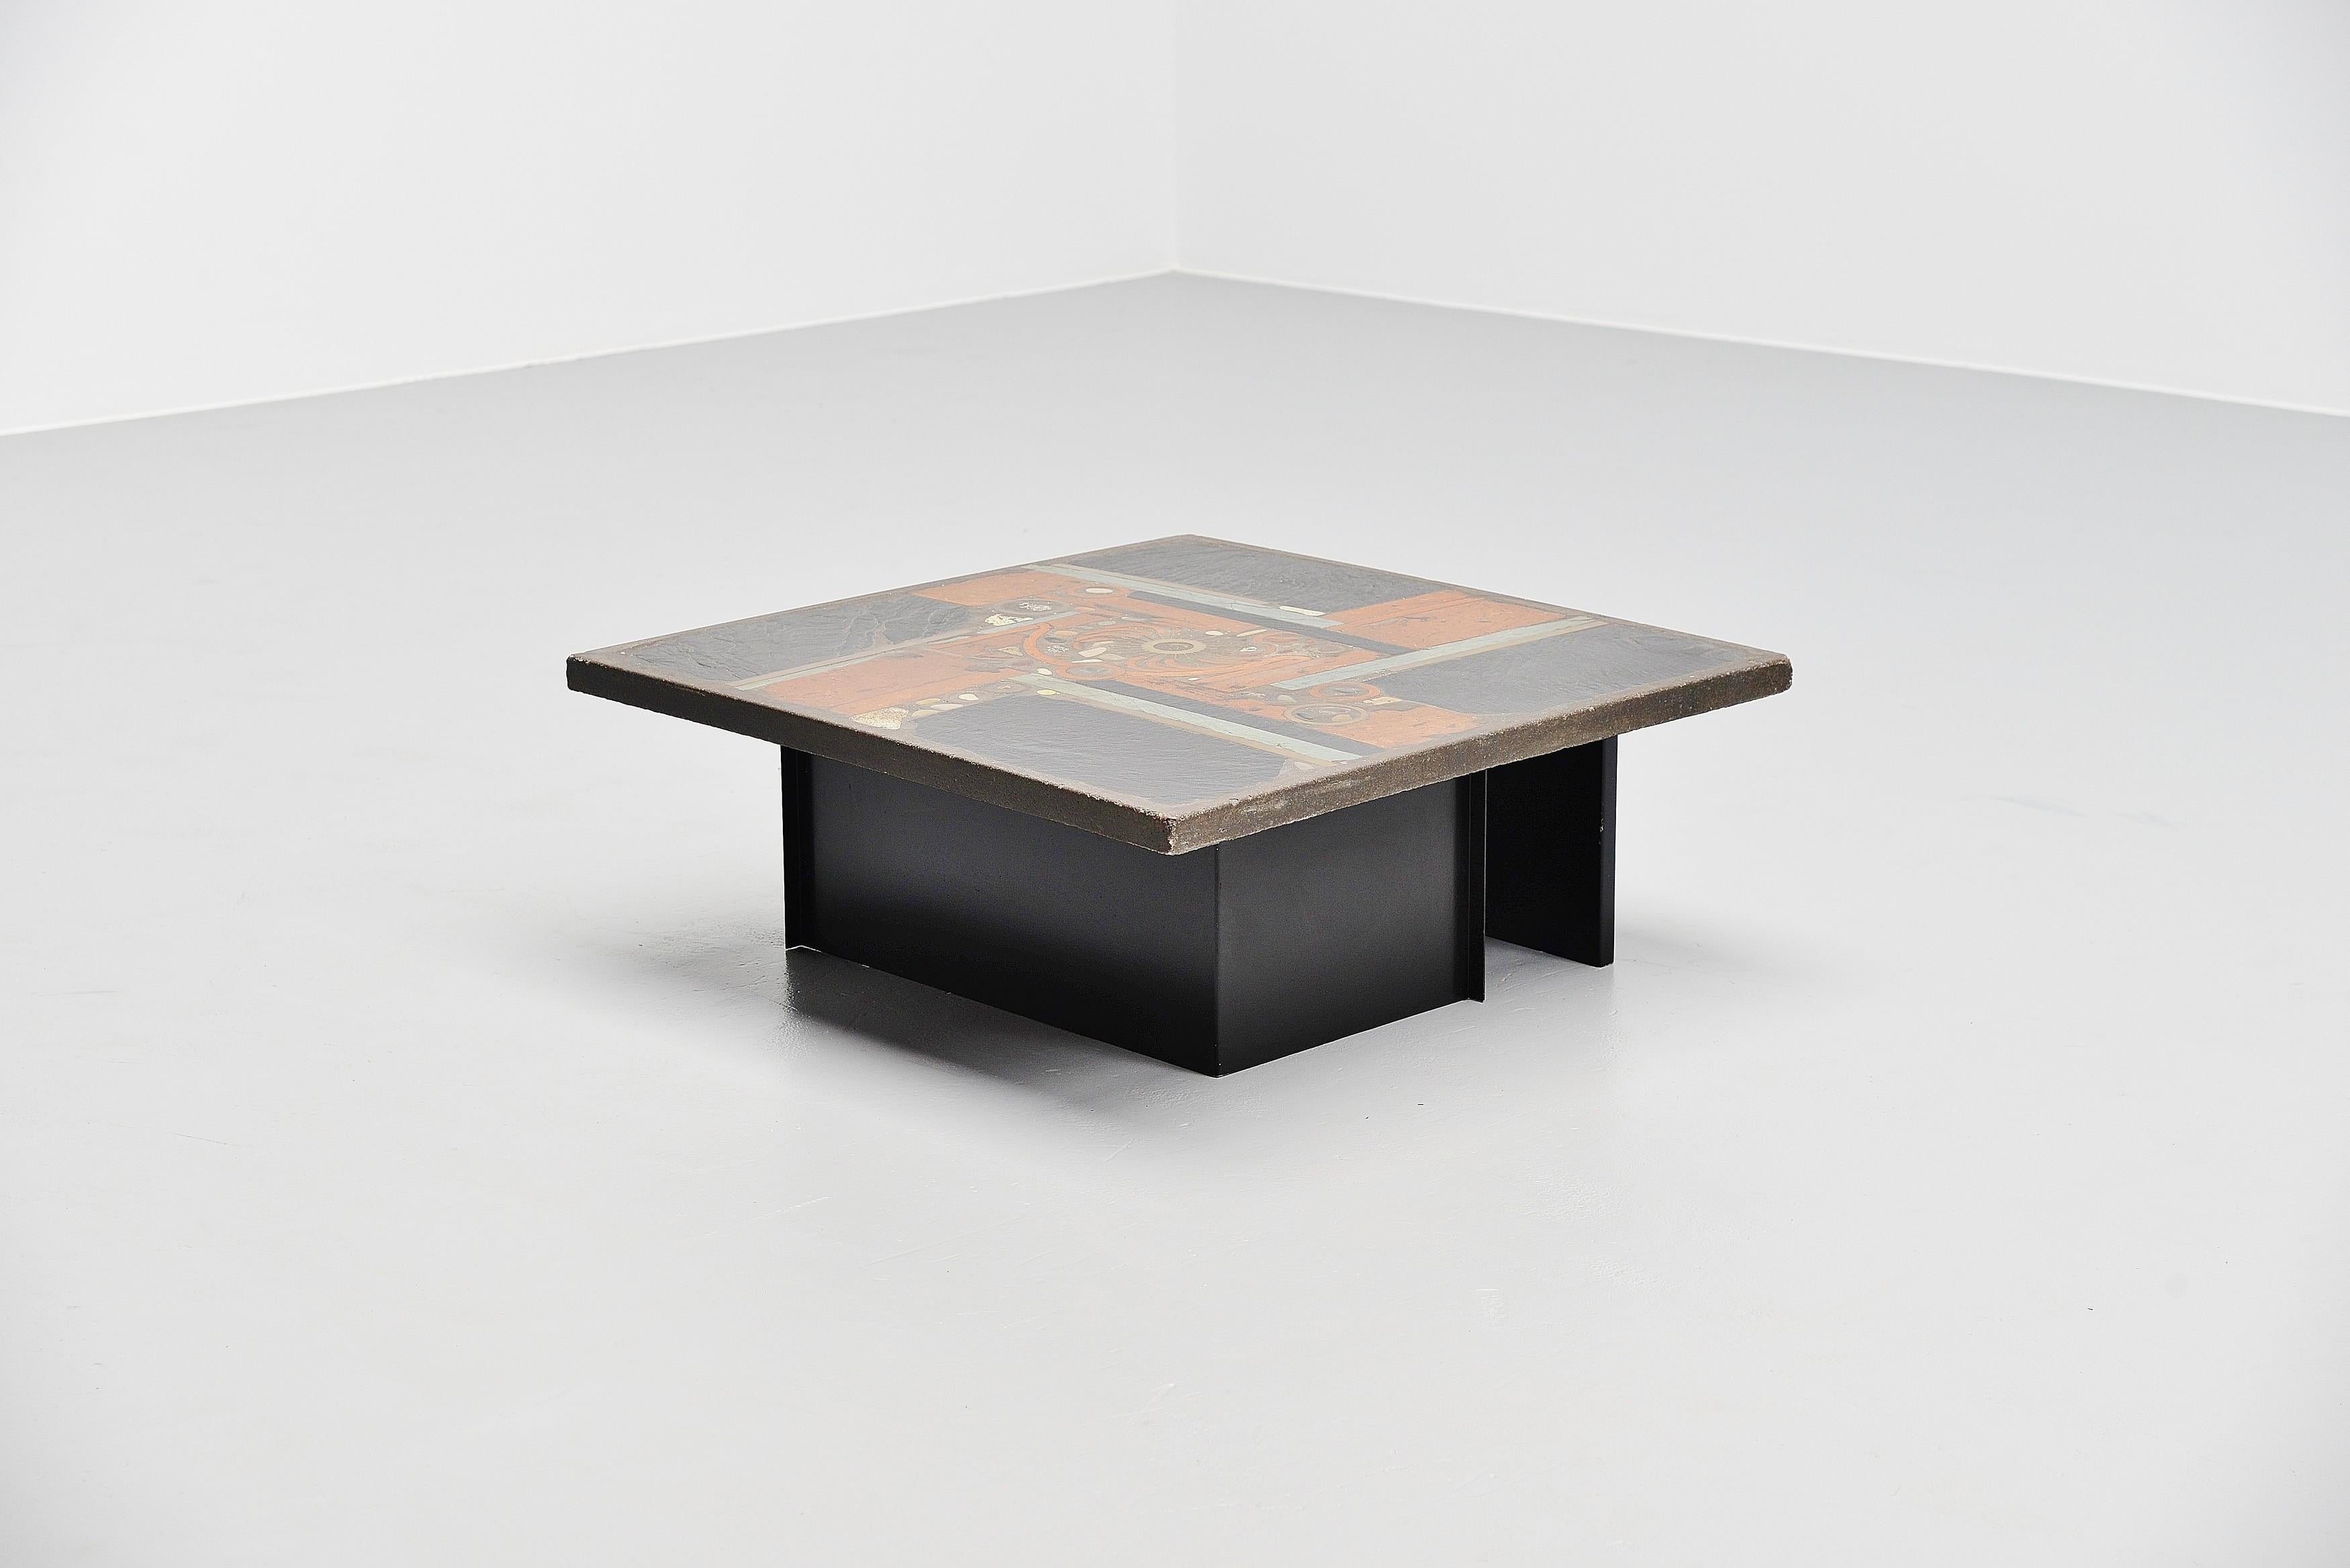 Very nice and unique solid concrete square coffee table designed and made by Paul Kingma, Holland 1978. Paul Kingma was well known for his architectural tables that pay a tribute to the riches of Nature by traveling extensively in search of rare